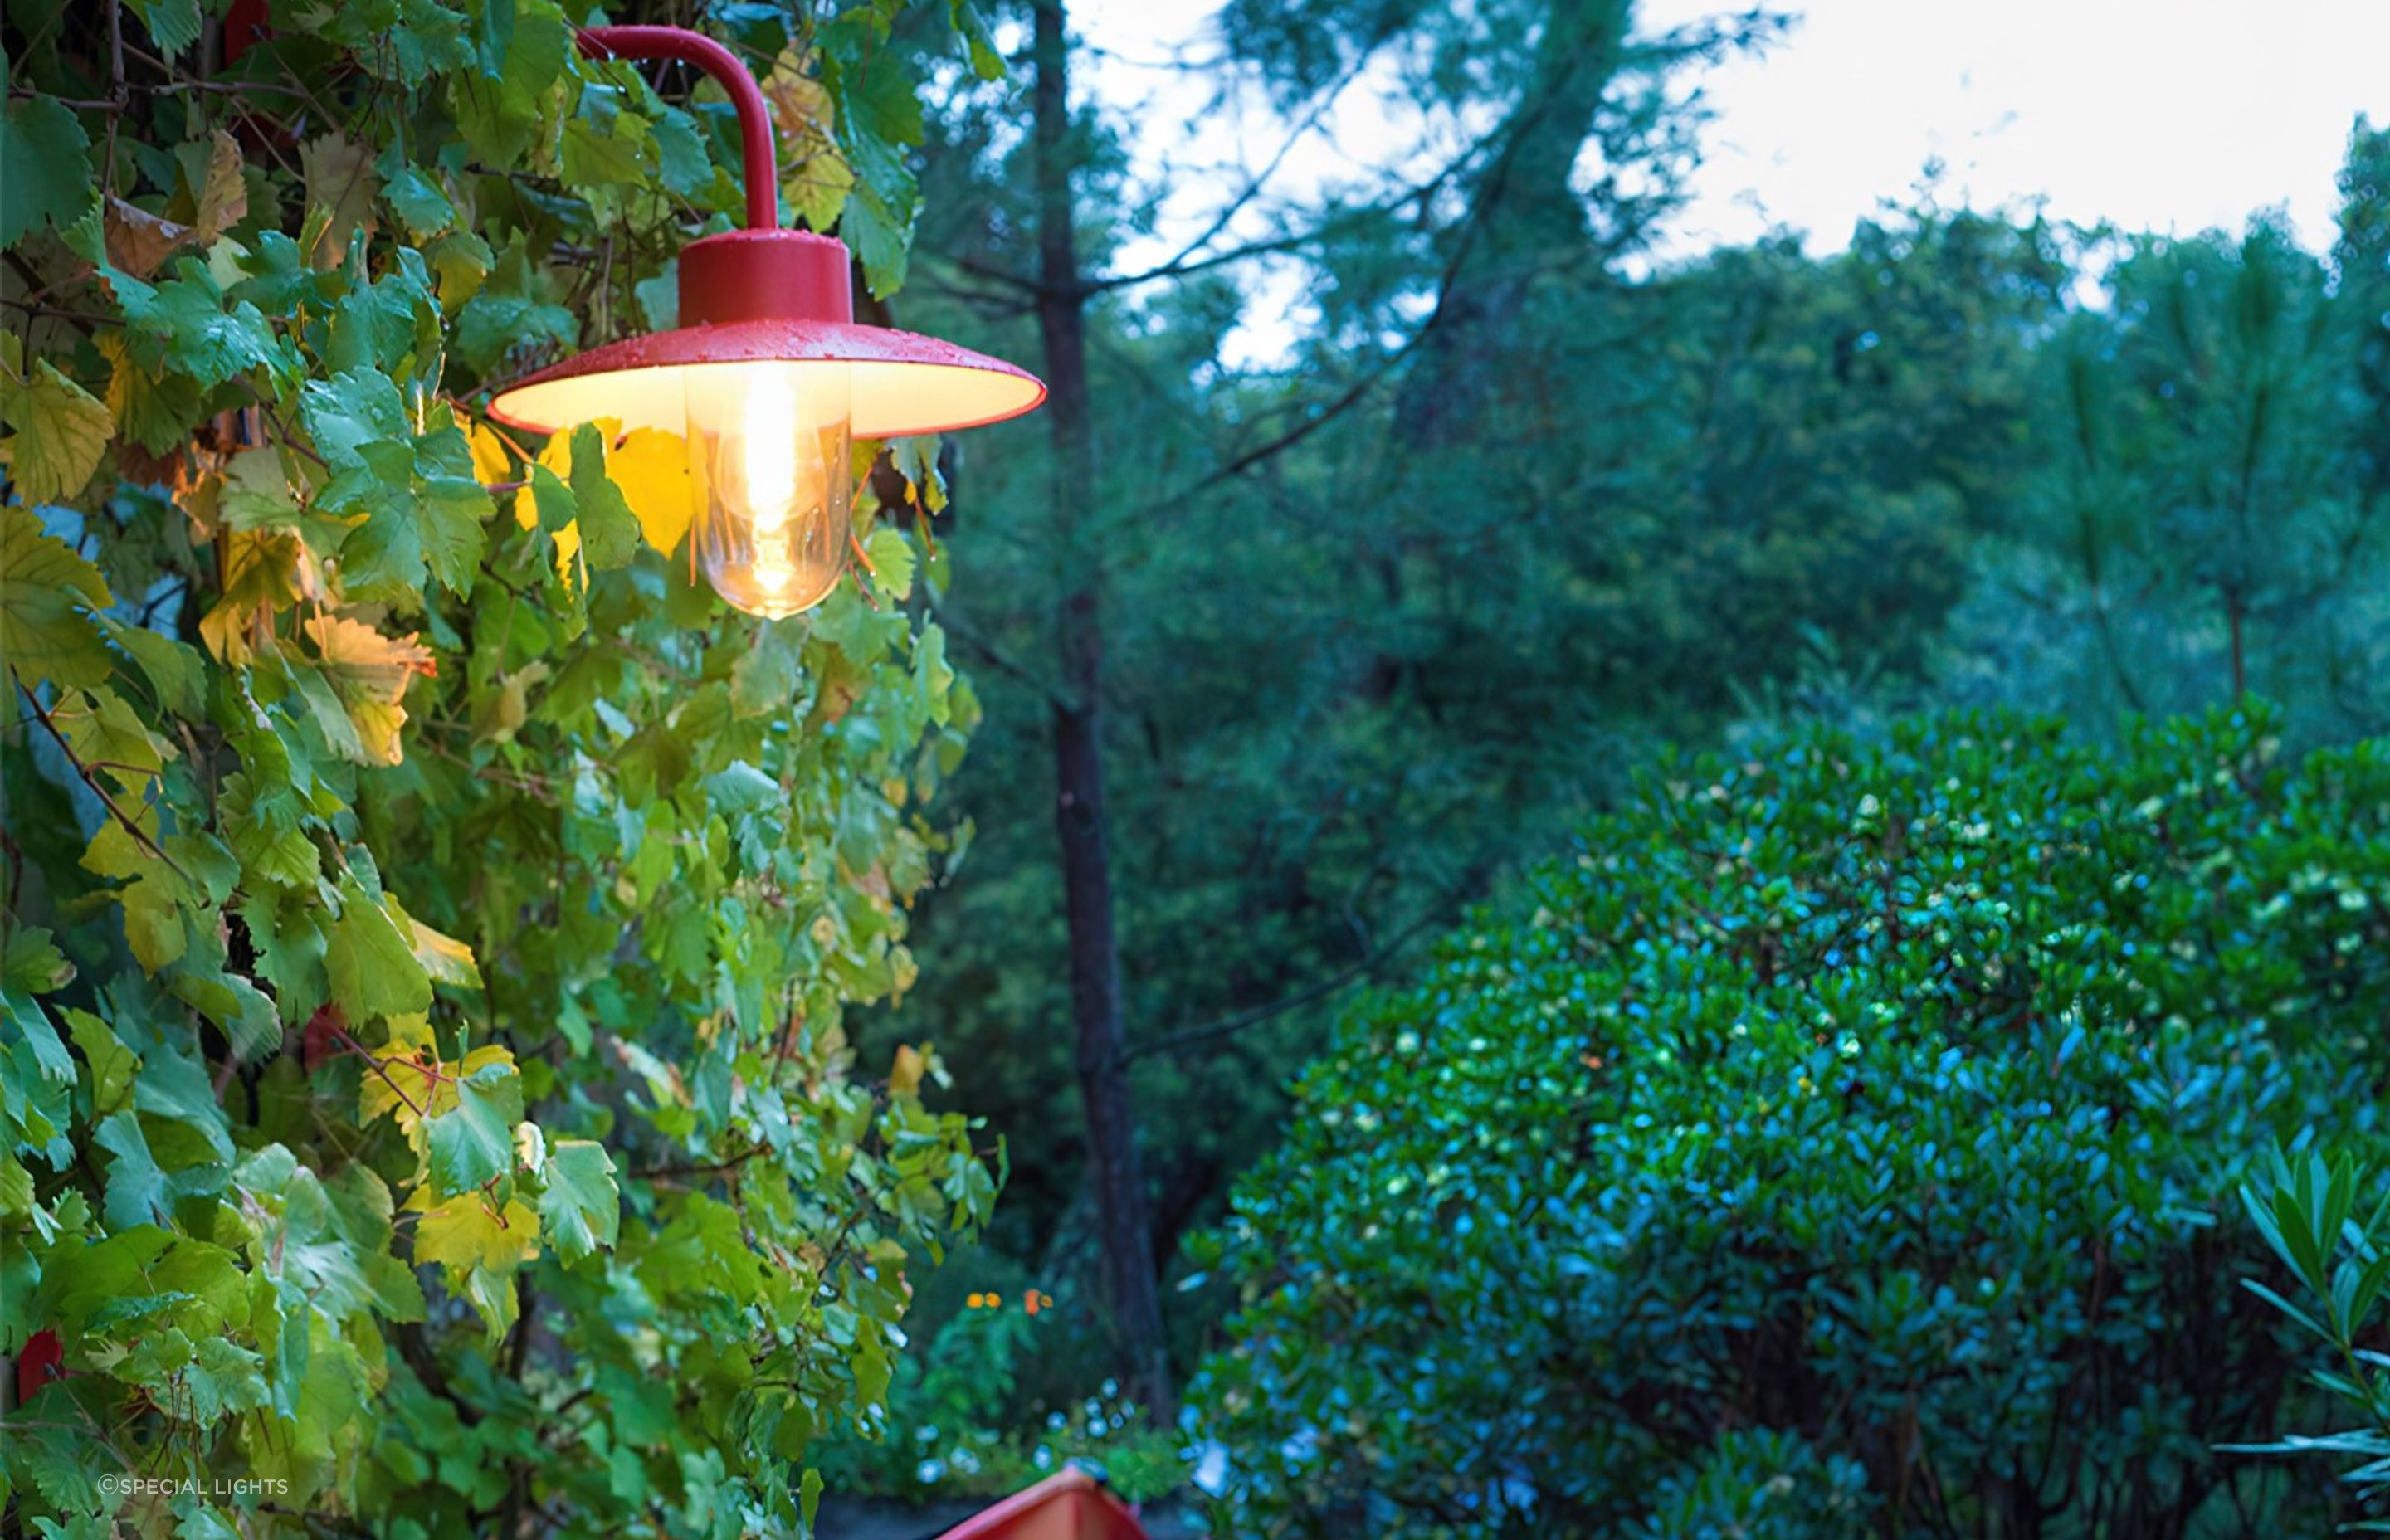 Products like the Belcour Model 9 Wall Light can add a pop of colour and light in any garden